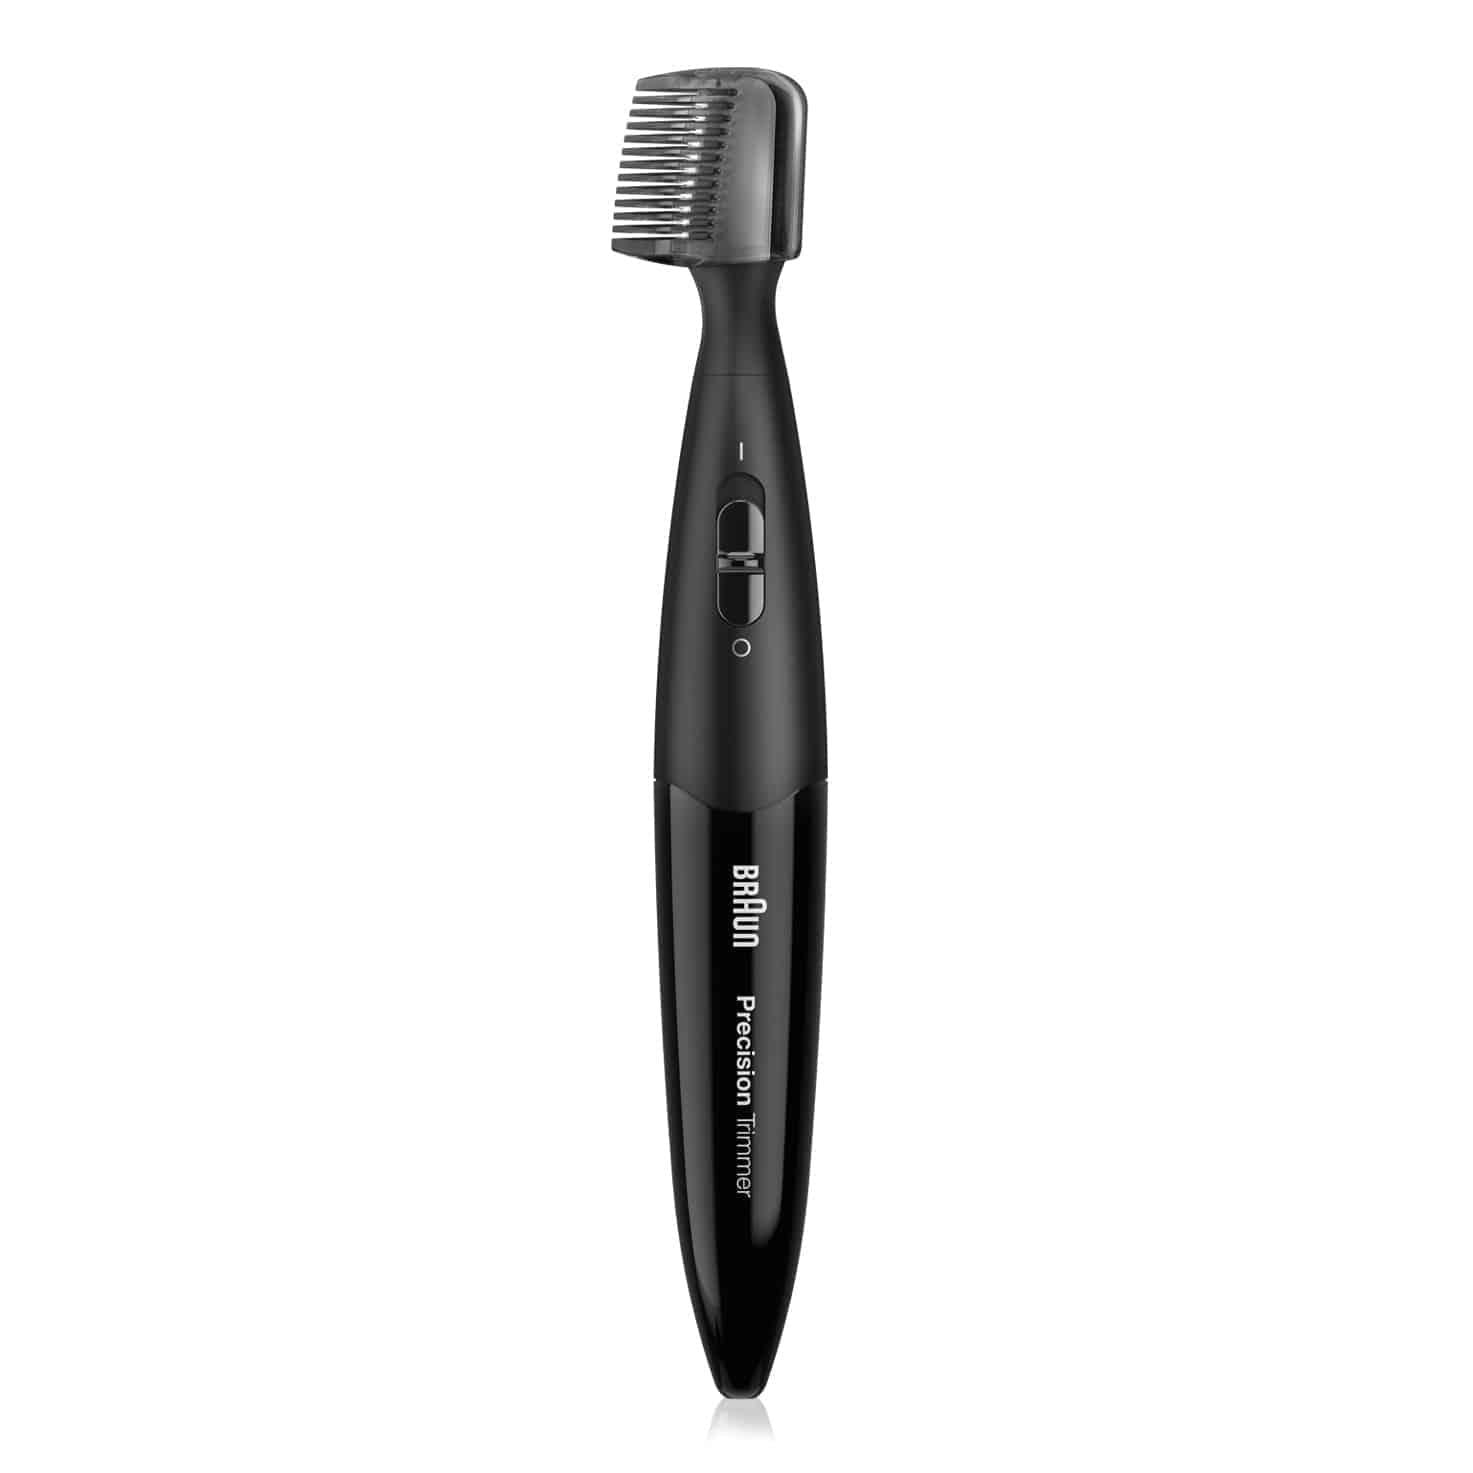 Braun Men's PT5010 Precision trimmer with 2 Combs and Trimmer Stand - Black - Healthxpress.ie